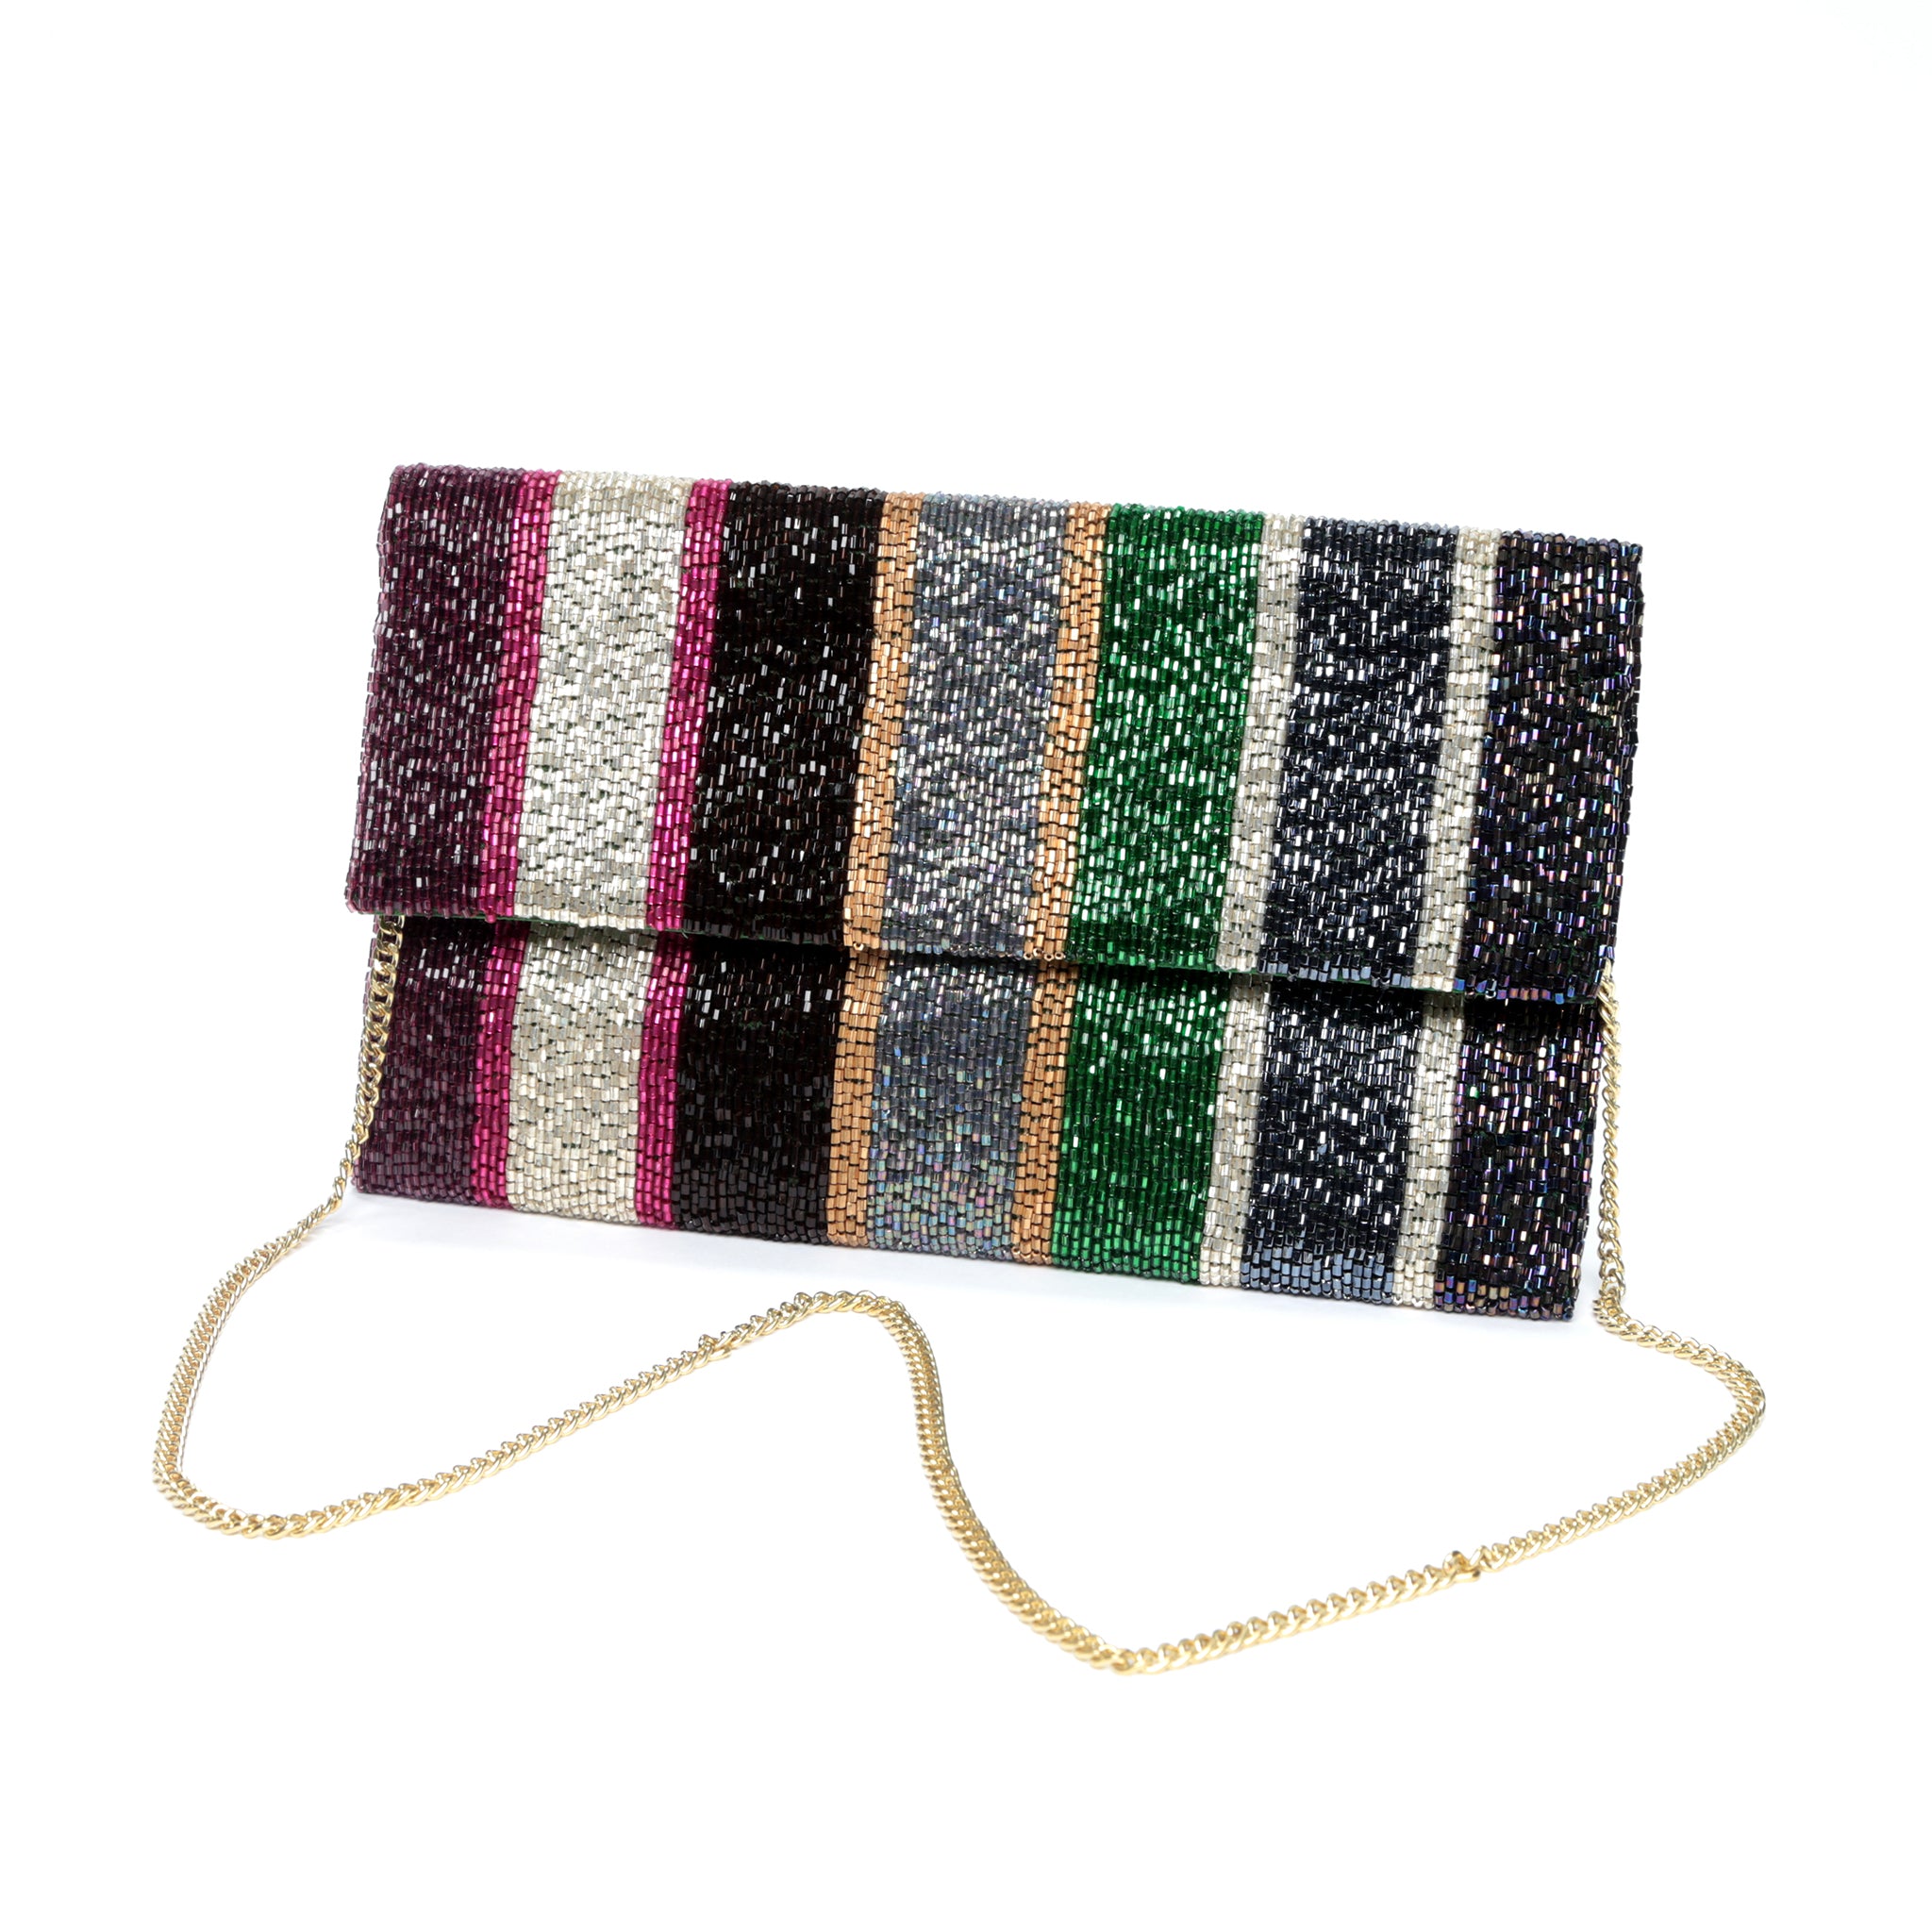 Stripe Beaded Half Flap Clutch with Chain Strap